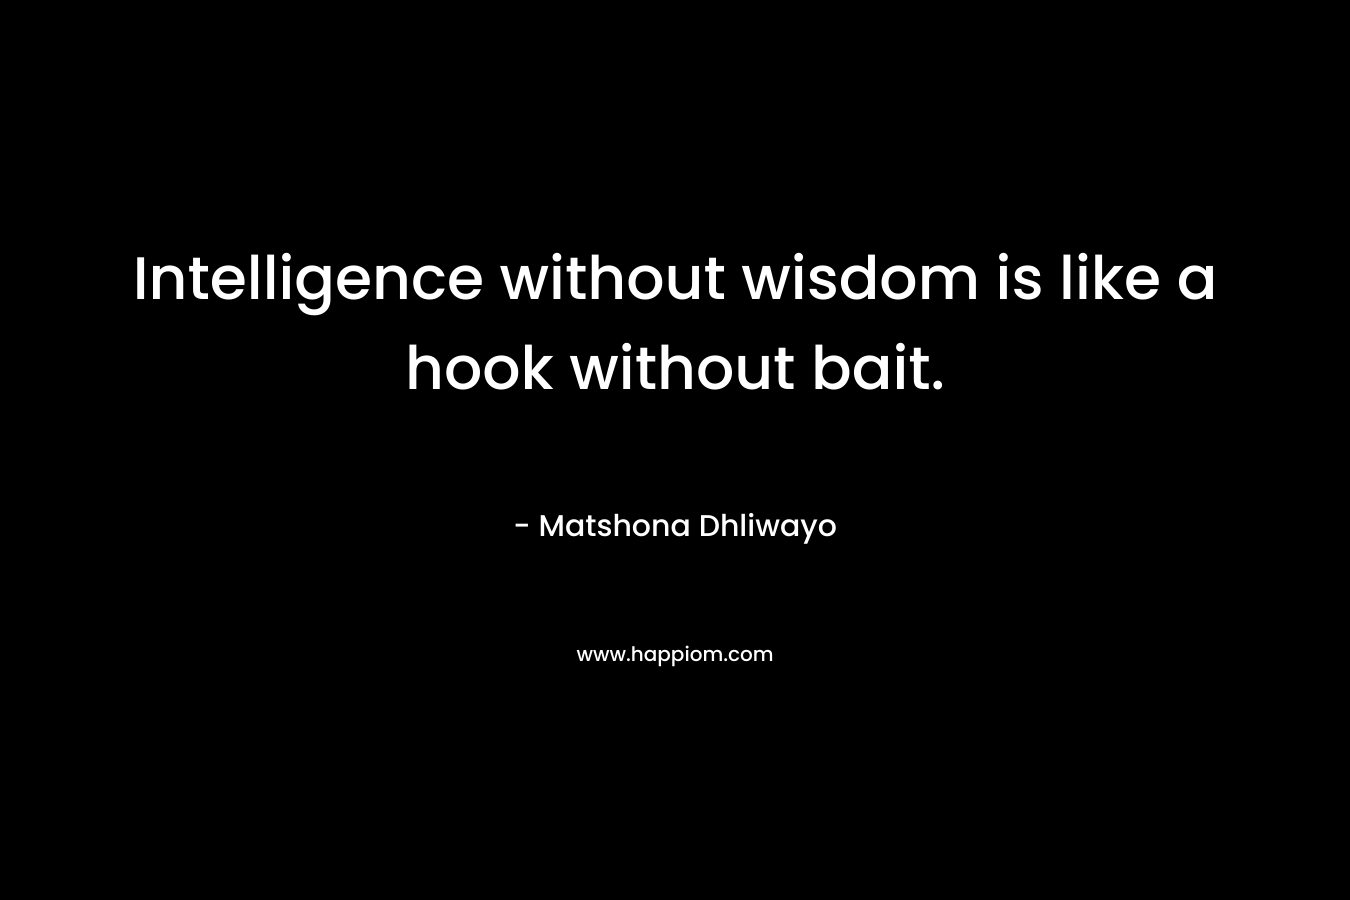 Intelligence without wisdom is like a hook without bait.